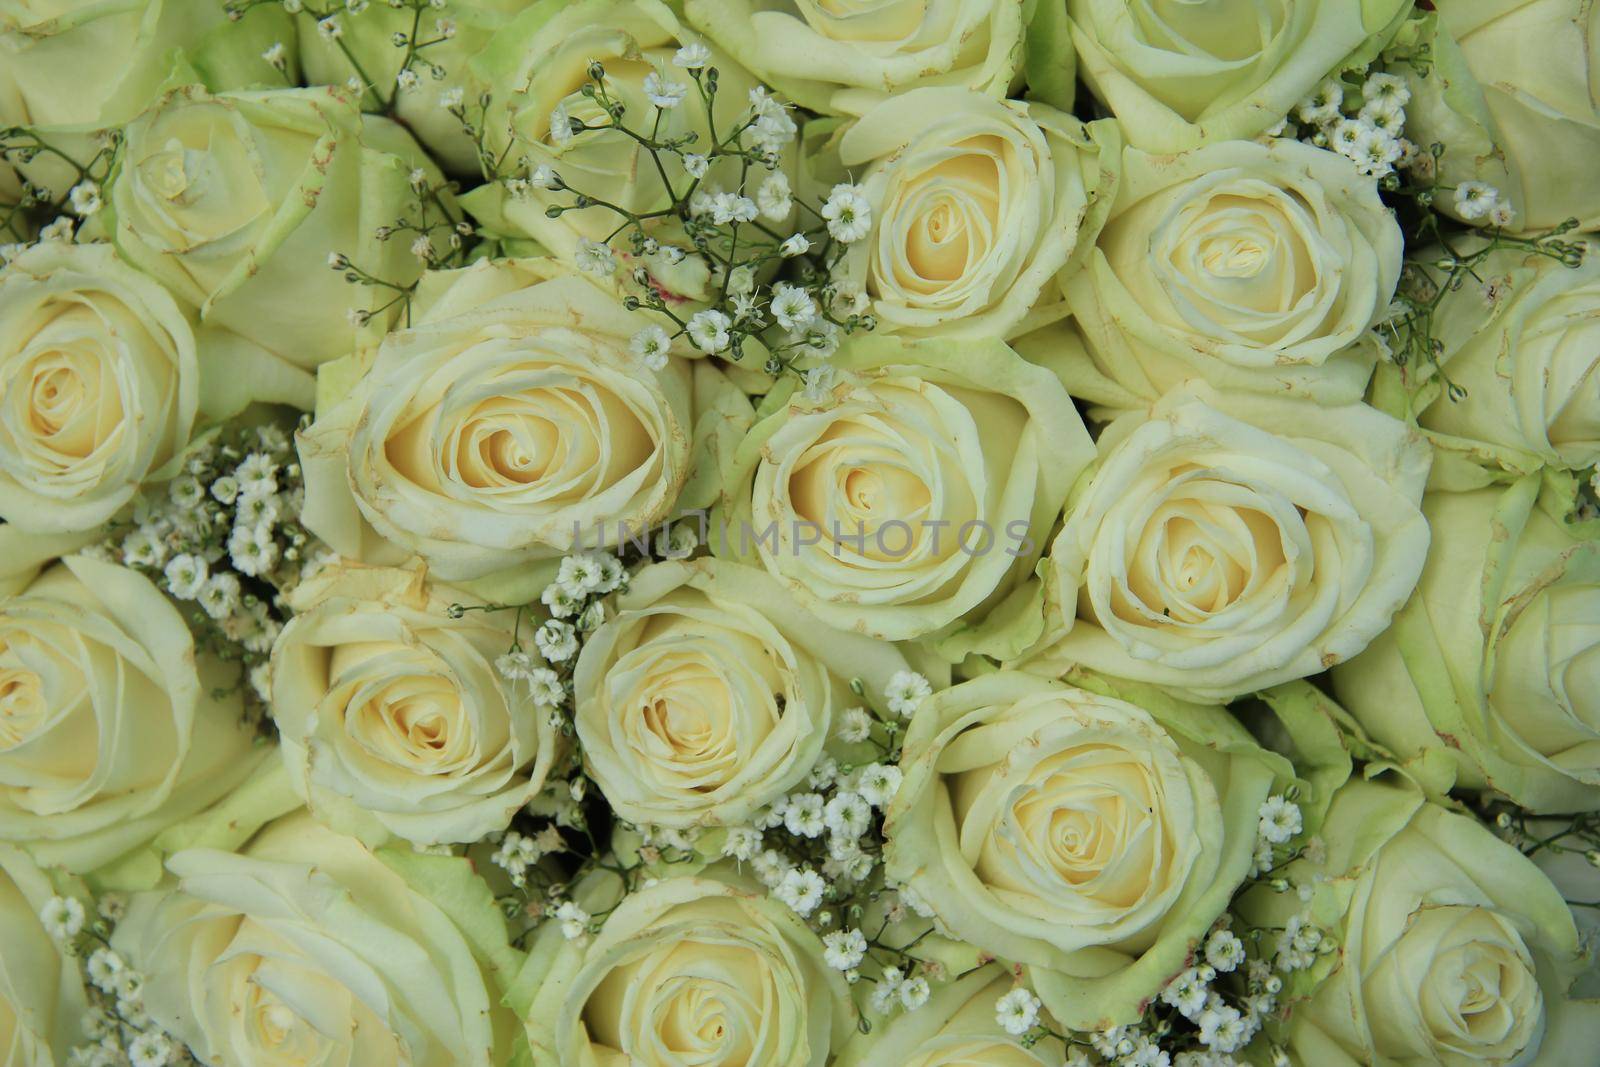 white rose and gypsophila bouquet for a wedding